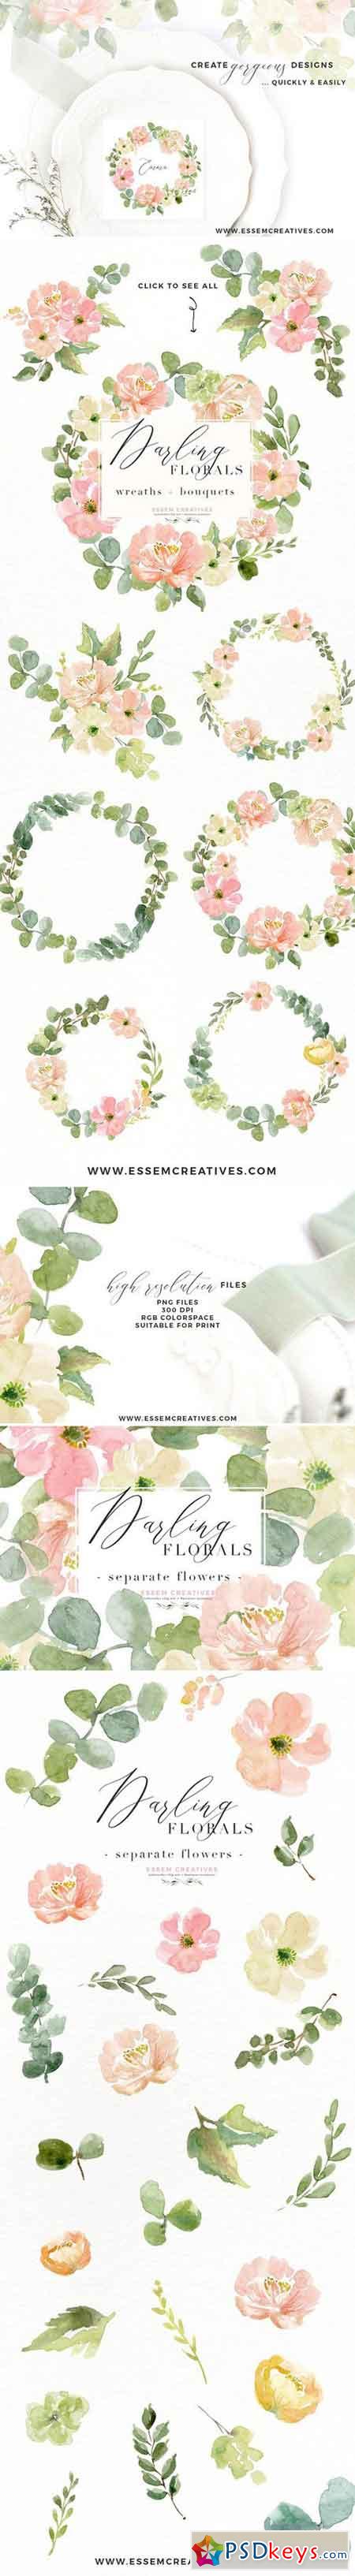 Wedding Invite Watercolor Flower PNG 2402689